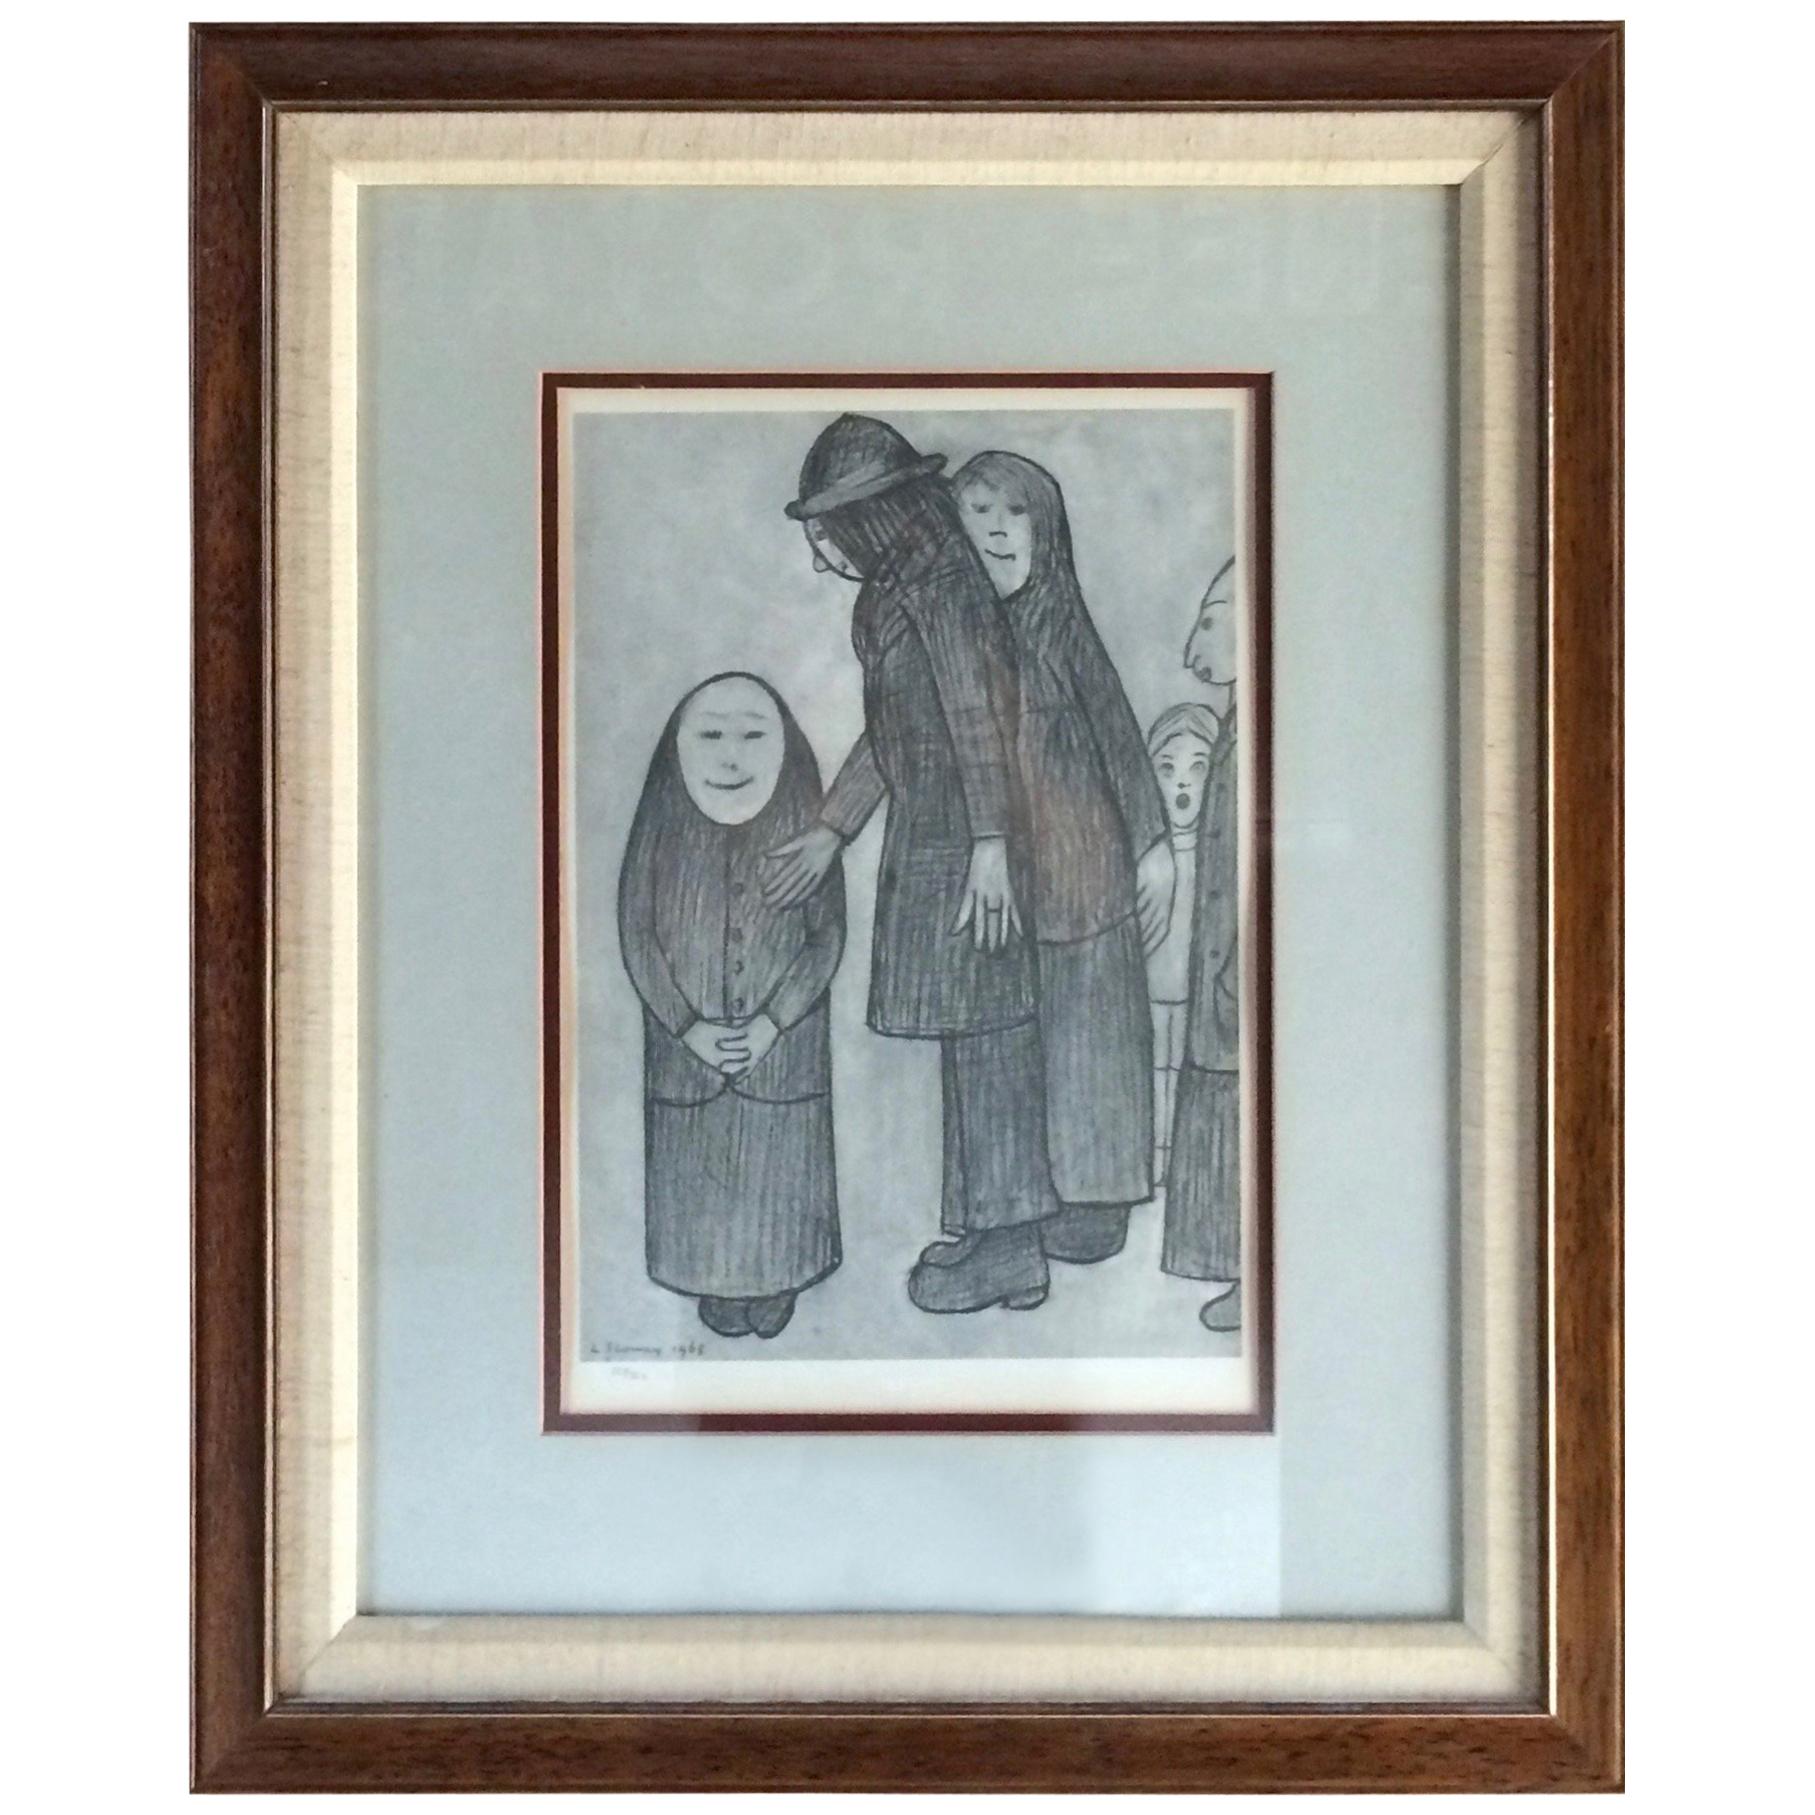 Laurence Stephen Lowry British 1887-1976 Family Discussion Limited Edition For Sale